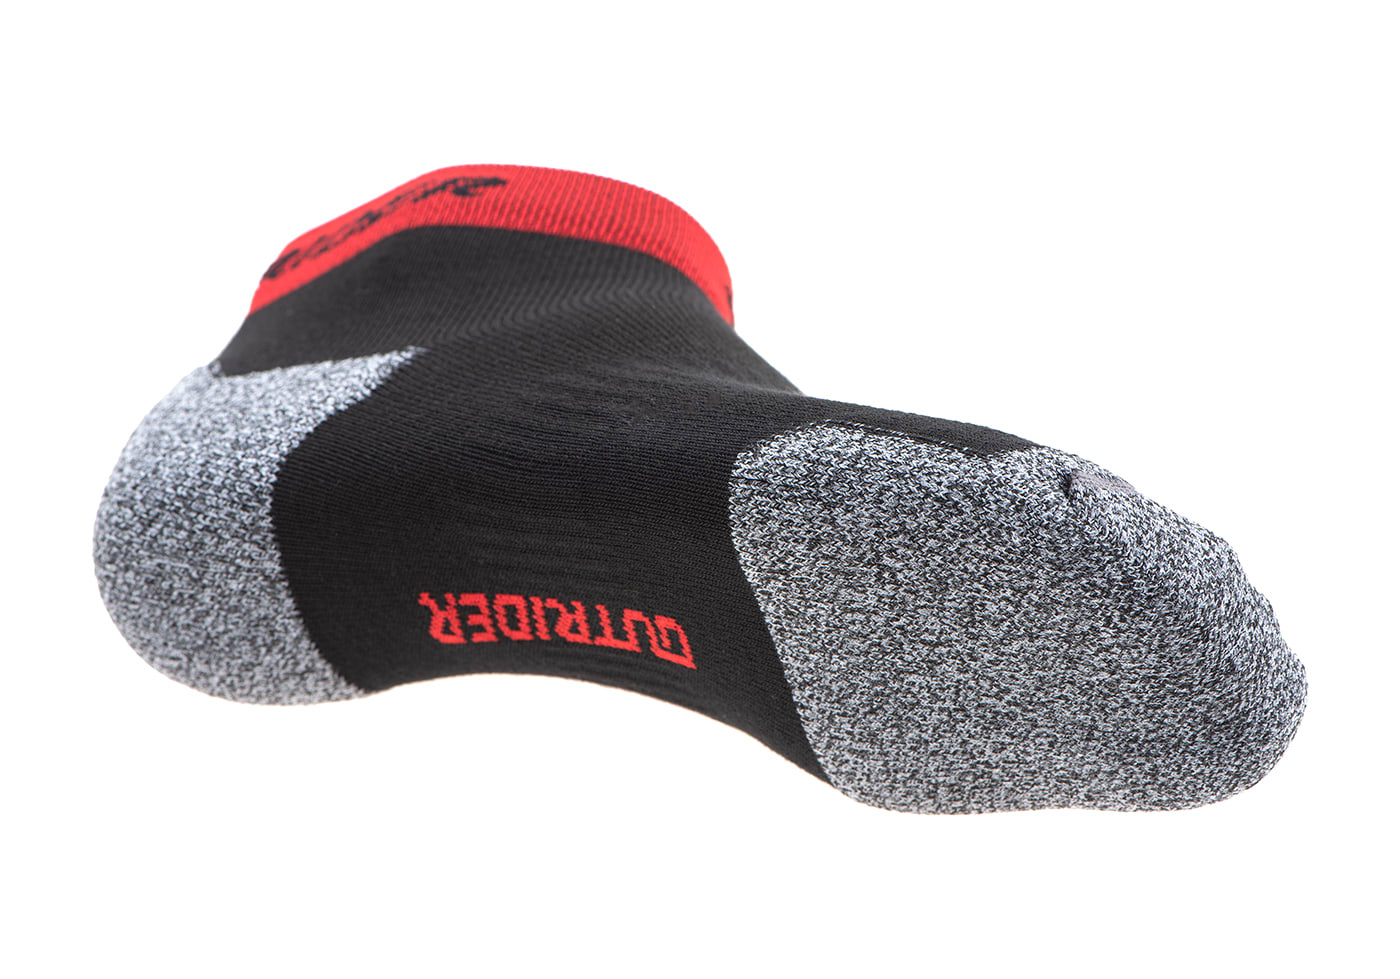 Outrider T.O.R.D. Ankle Socks